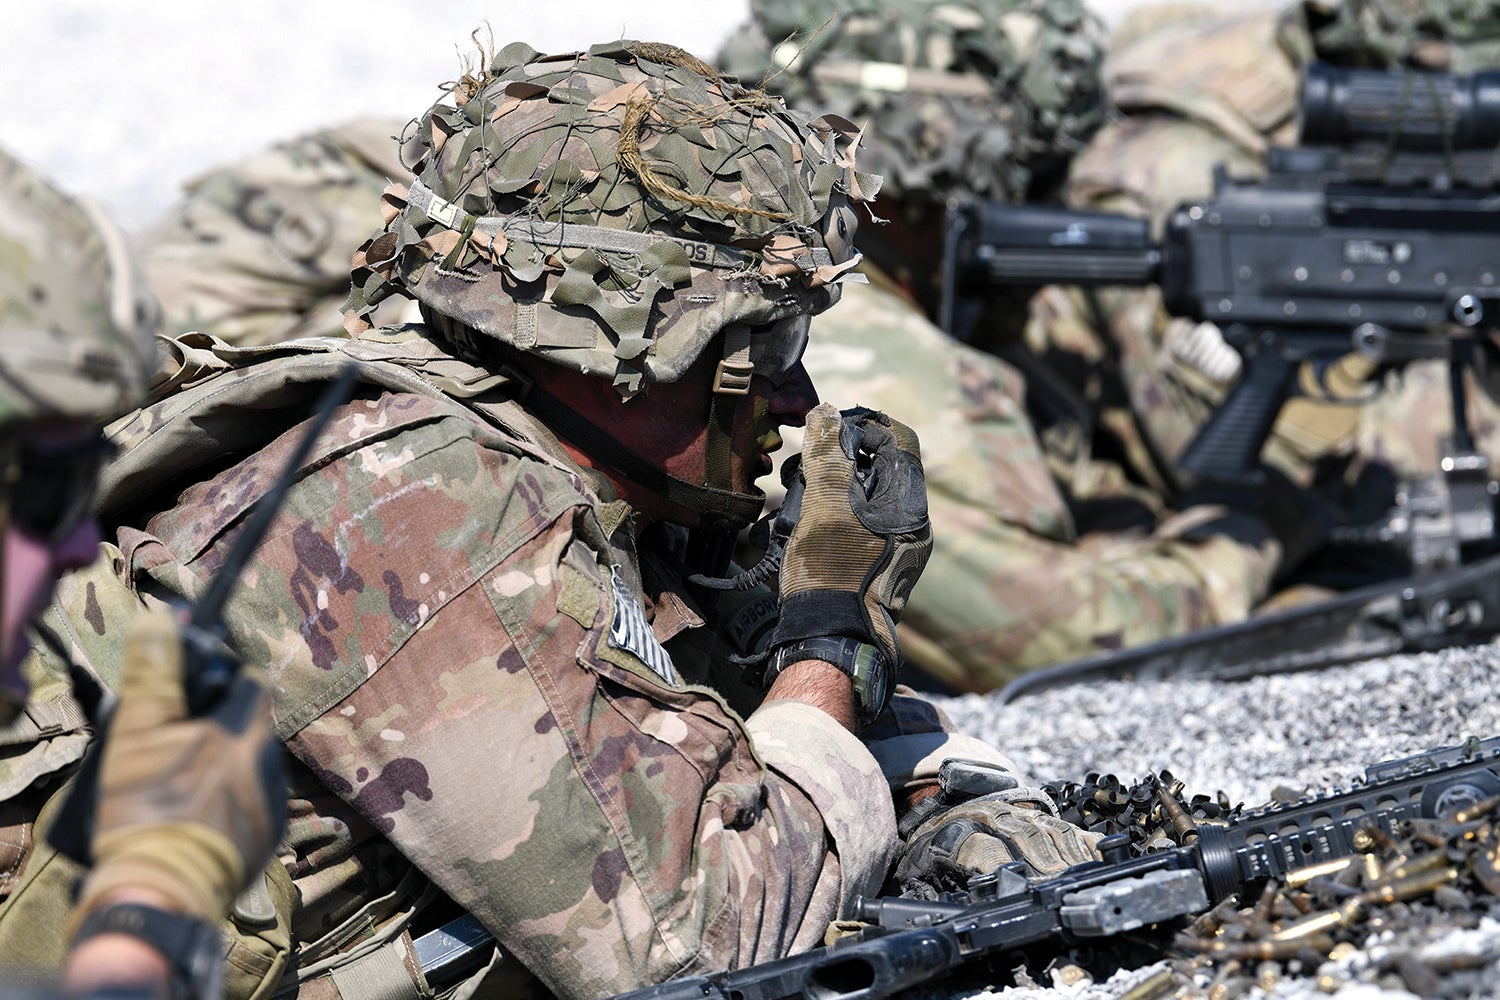 A paratrooper with the 173rd Airborne Brigade uses a radio during a live-fire exercise in Slovenia. (Credit: U.S. Army/Paolo Bovo)